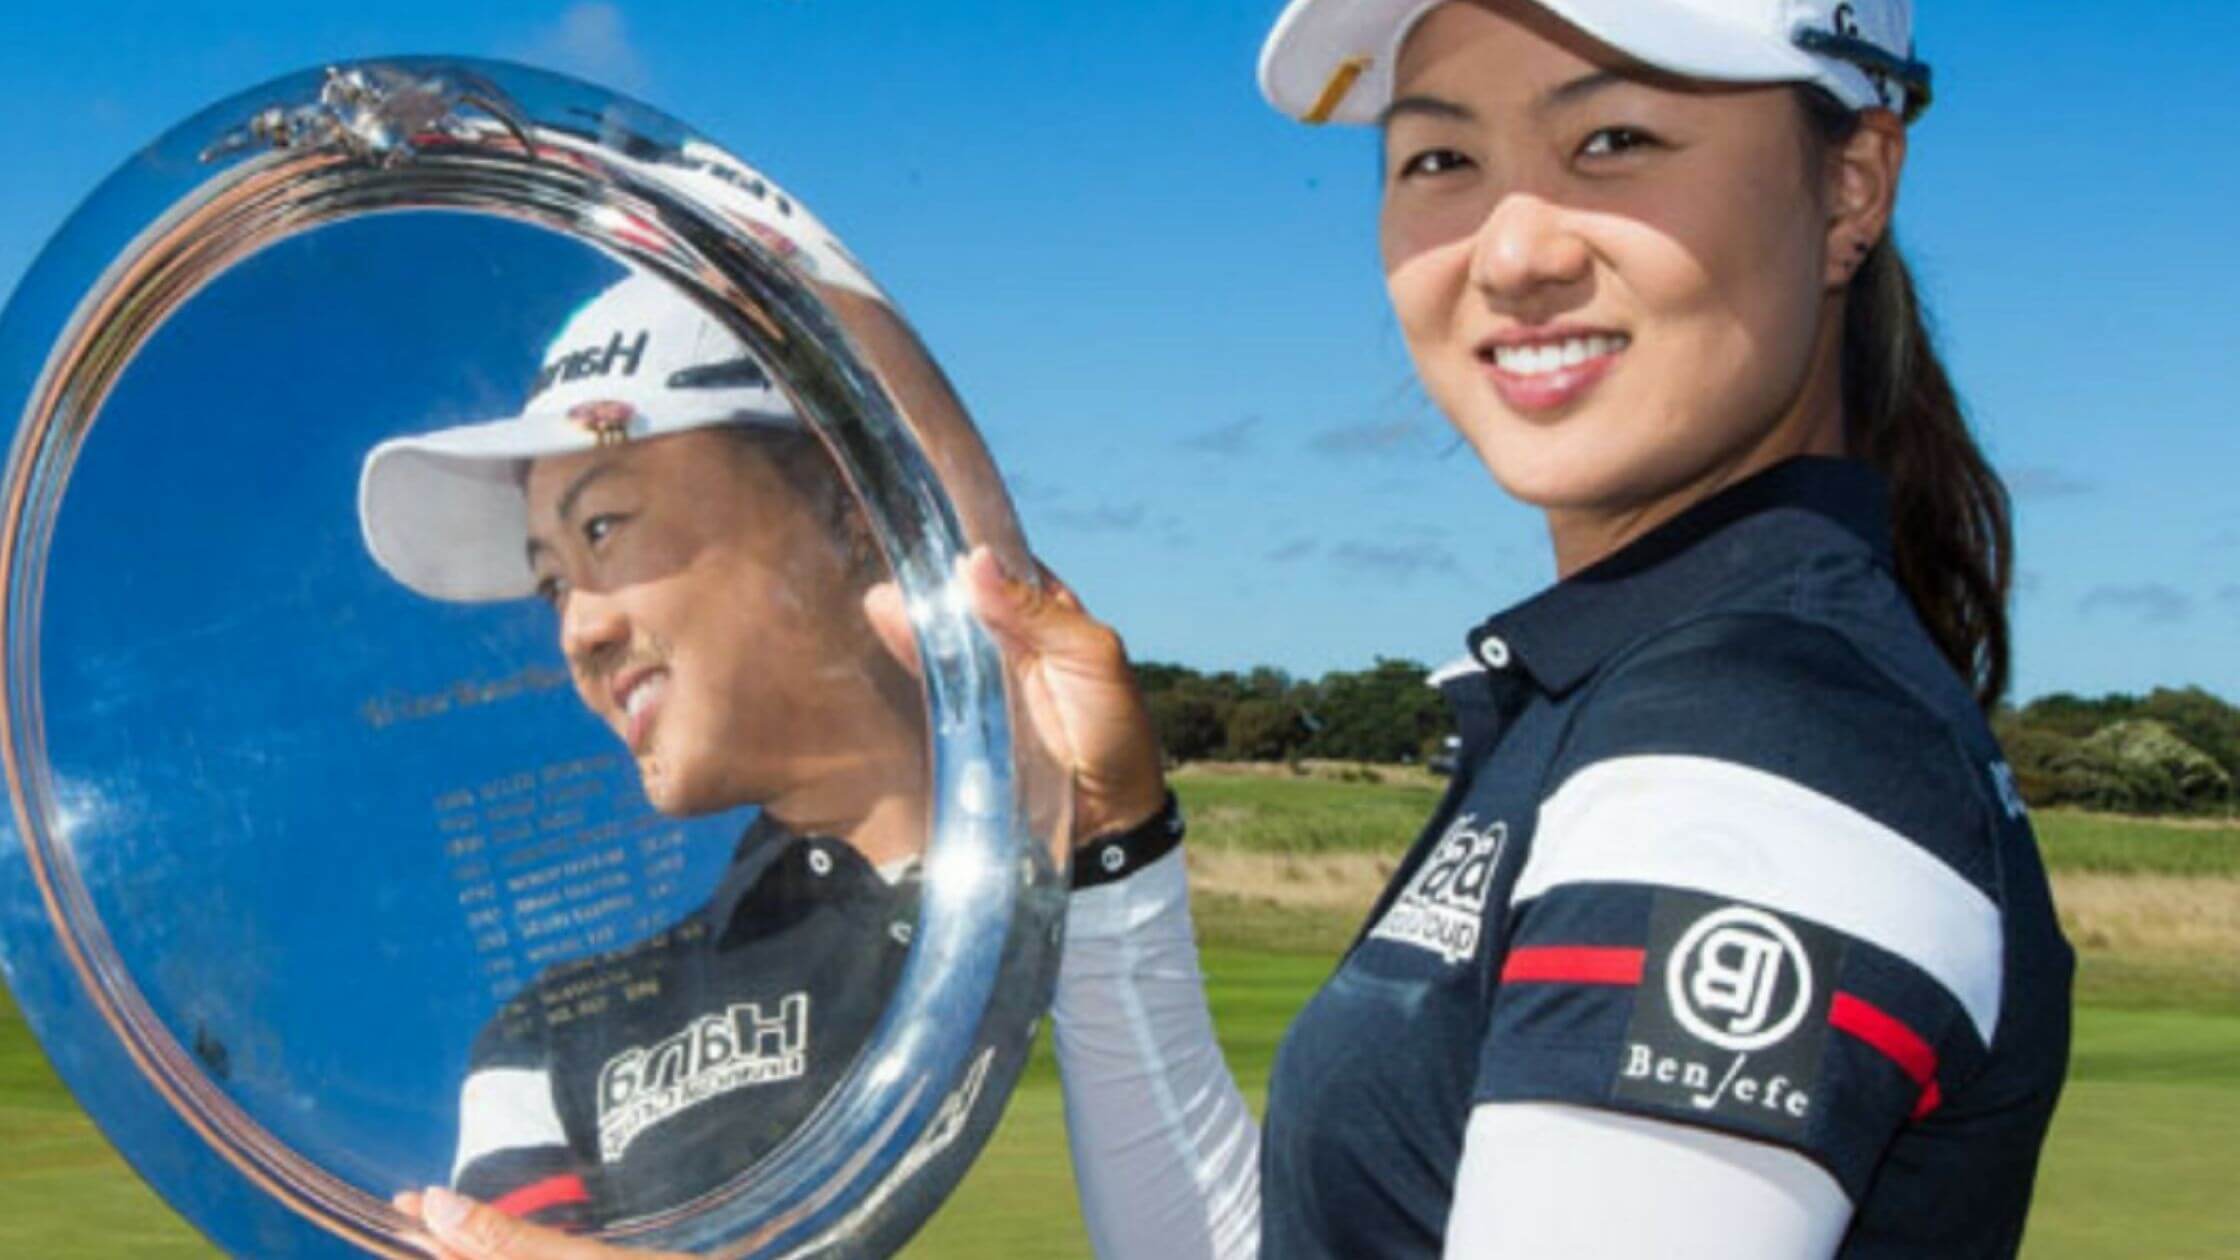 MINJEE LEE WINS SECOND OATES VIC OPEN TITLE